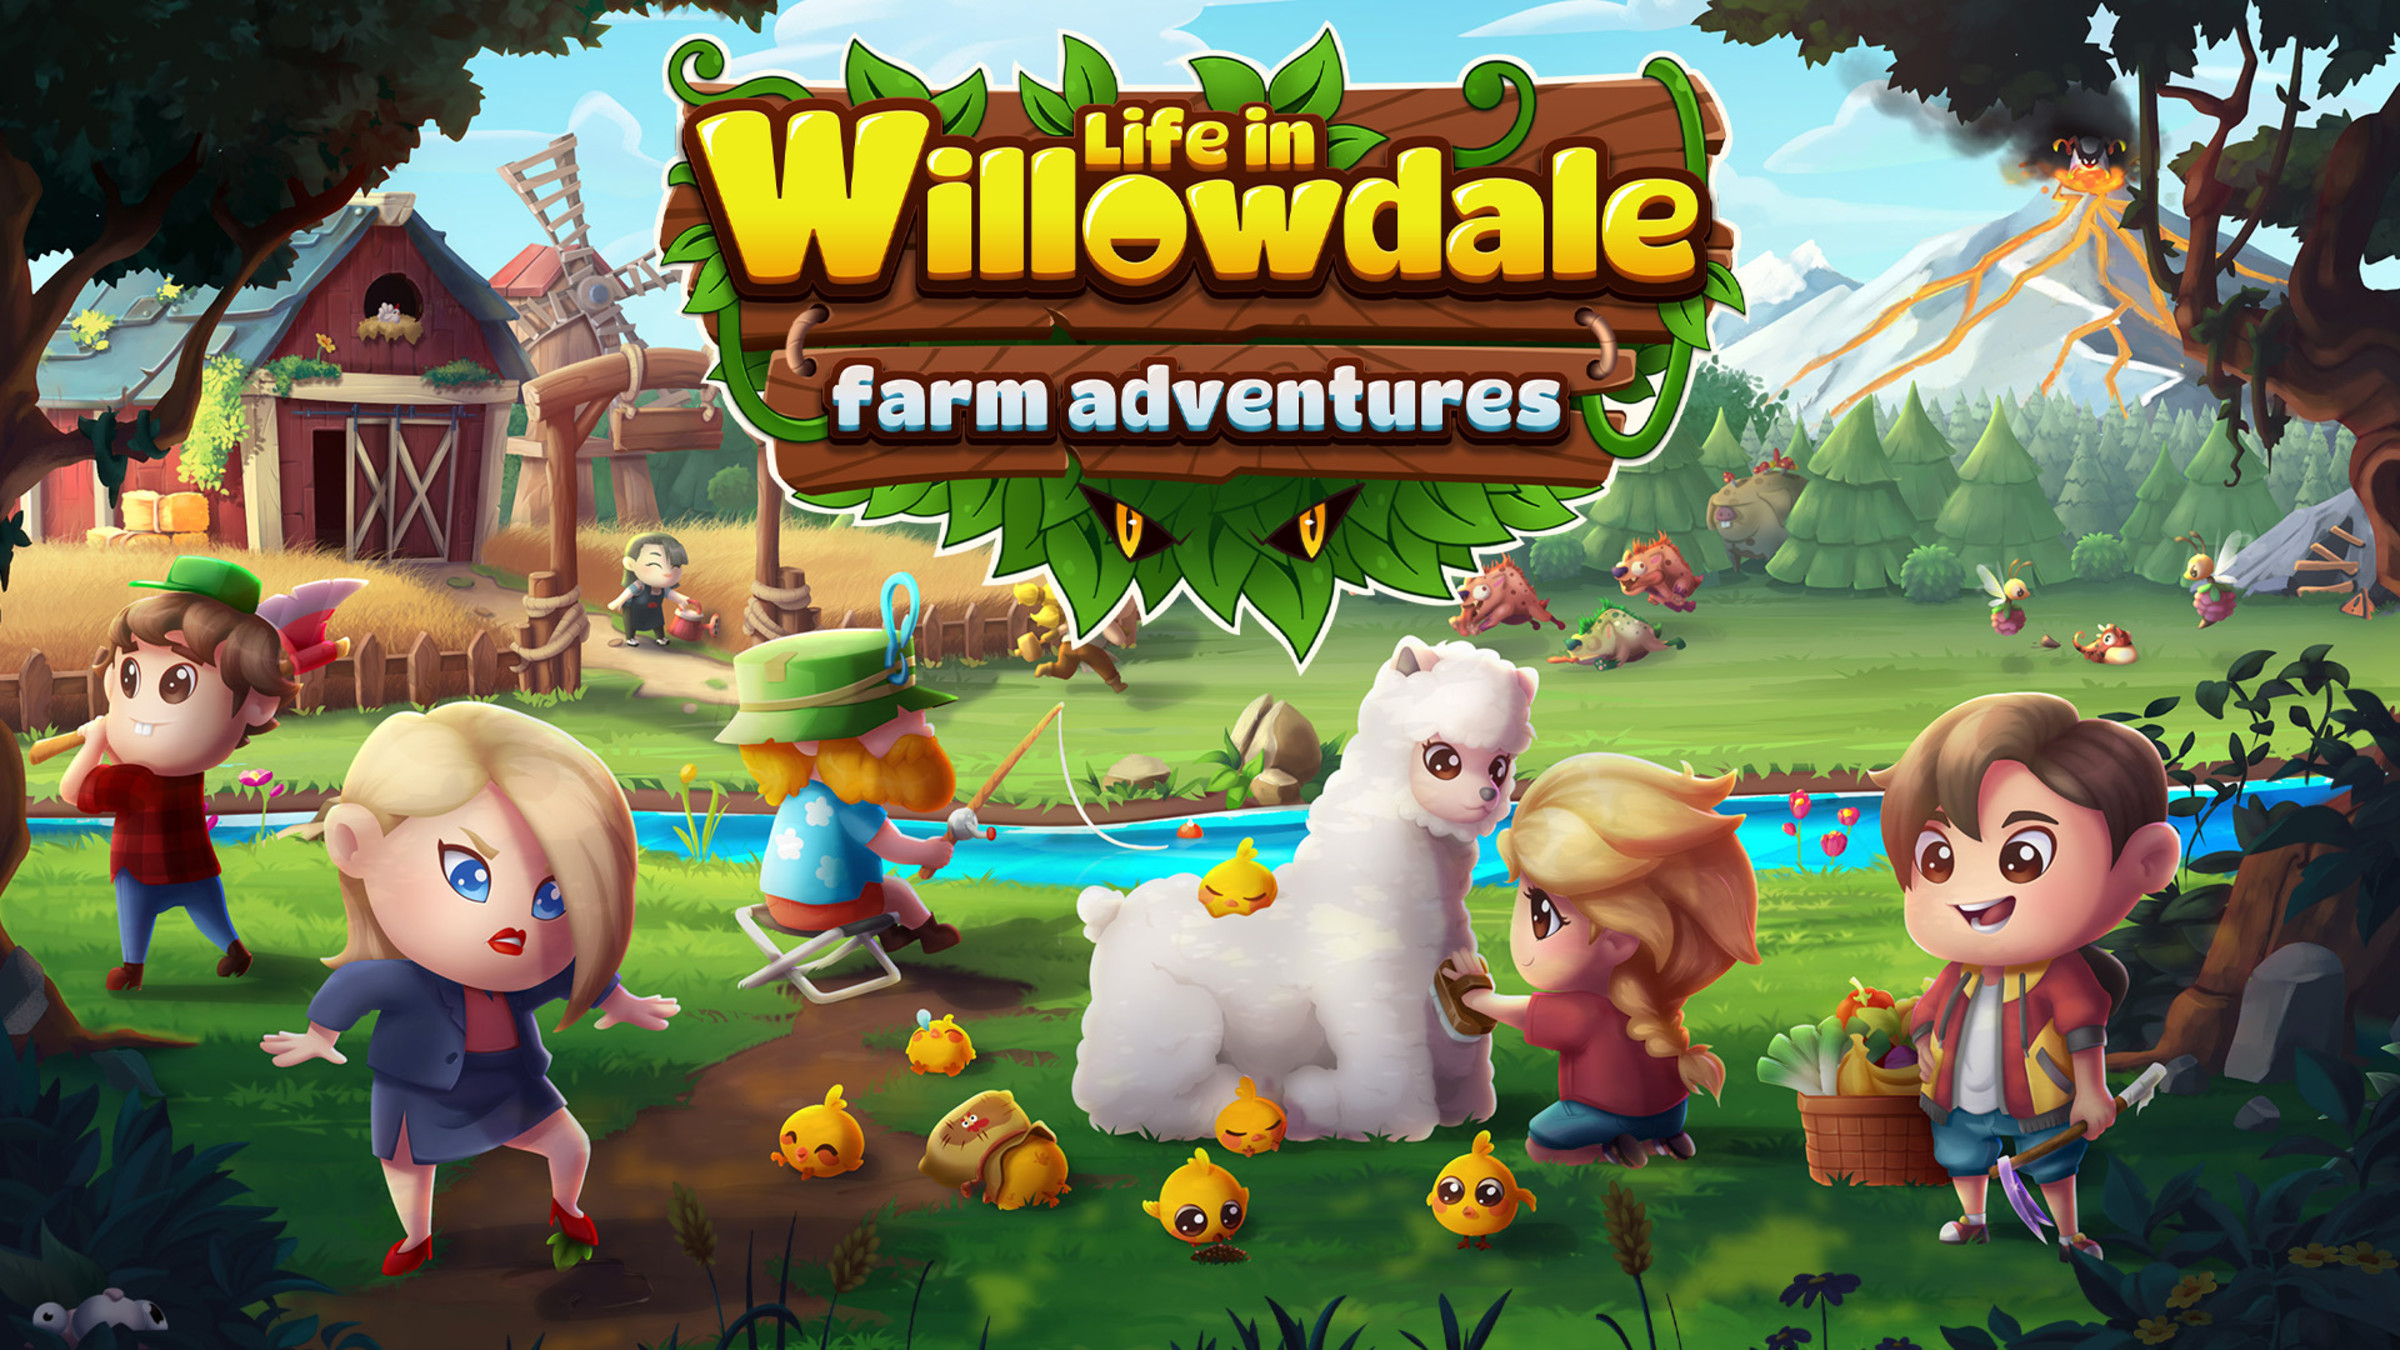 https://assets.nintendo.com/image/upload/c_fill,w_1200/q_auto:best/f_auto/dpr_2.0/ncom/en_US/games/switch/l/life-in-willowdale-farm-adventures-switch/